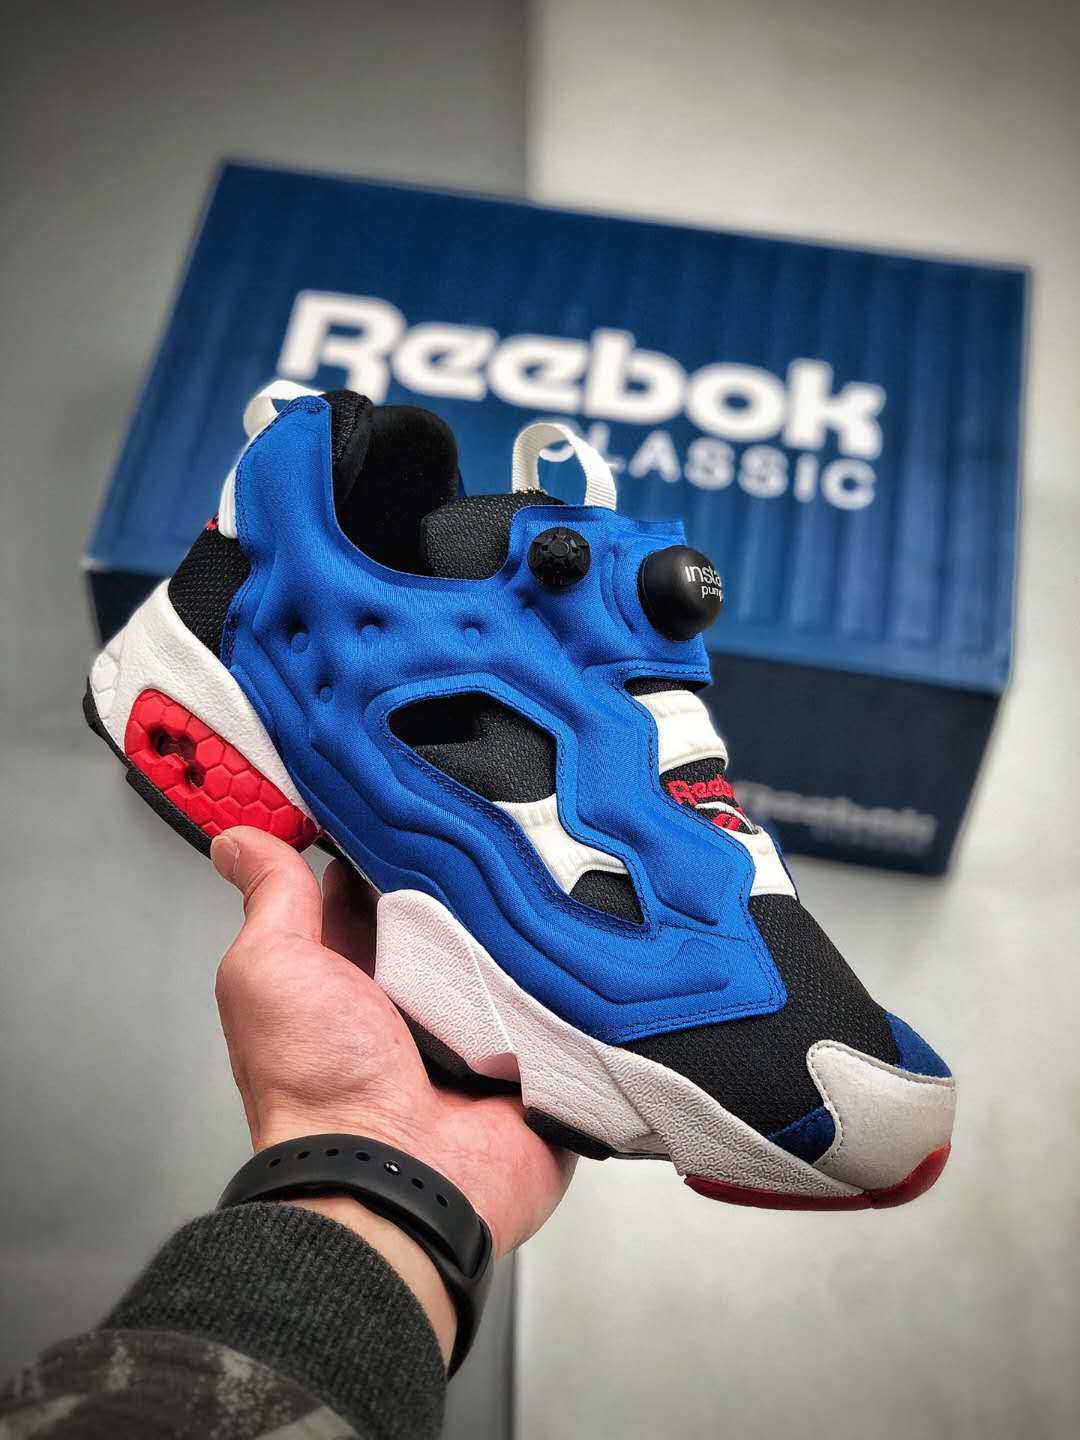 Reebok InstaPump Fury OG 'Tricolor' M40934 - Iconic Sneaker with Tri-Tone Design